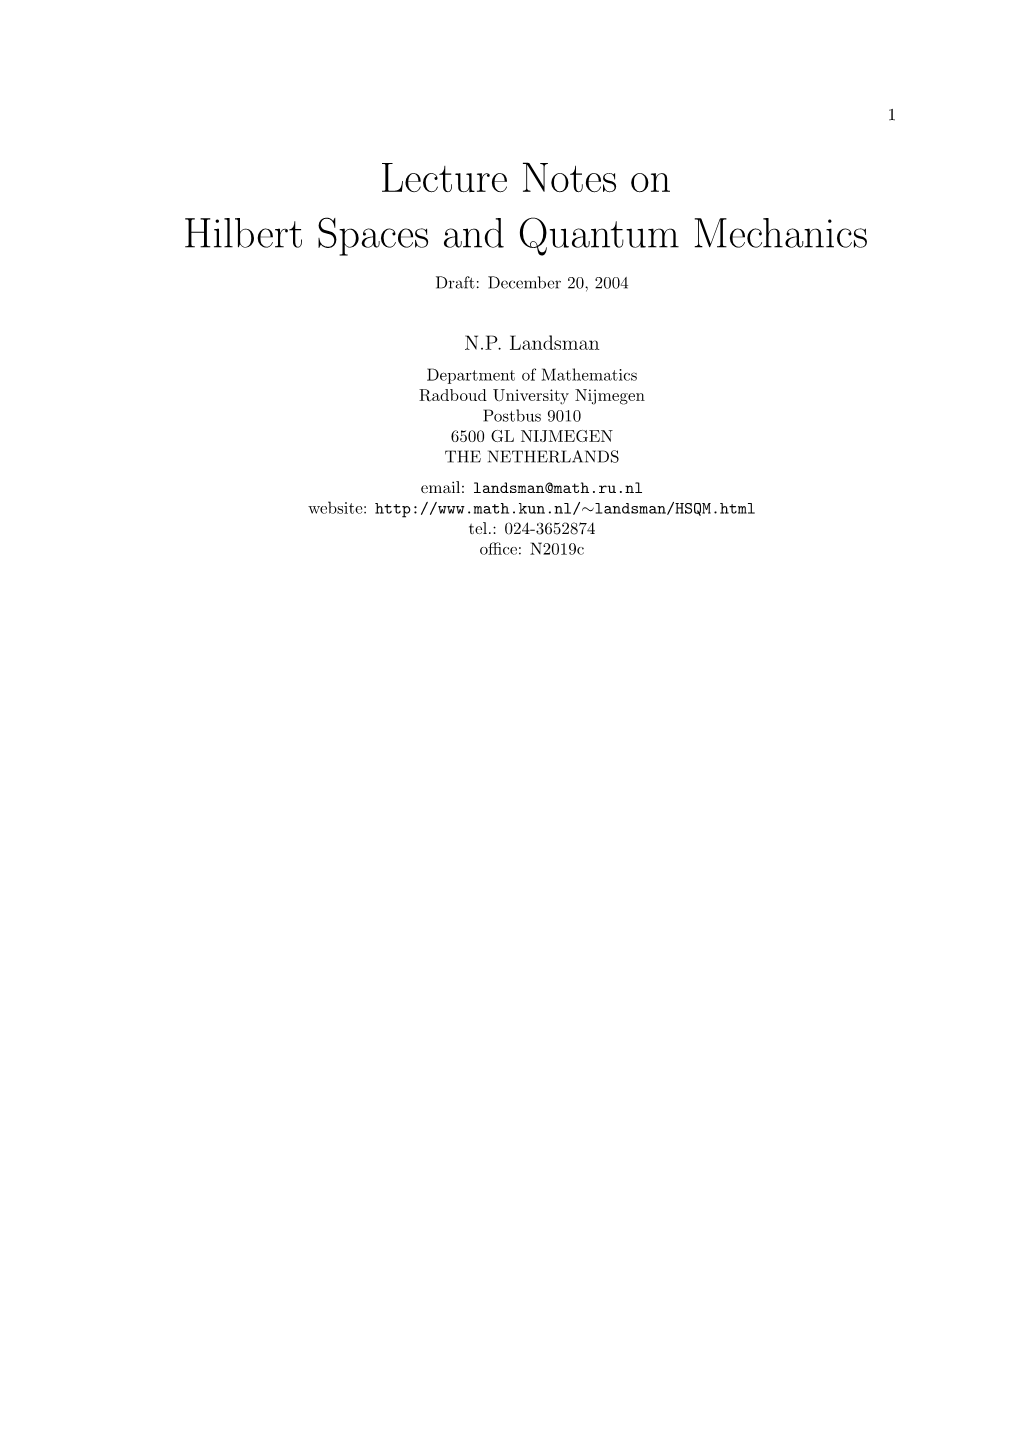 Lecture Notes on Hilbert Spaces and Quantum Mechanics